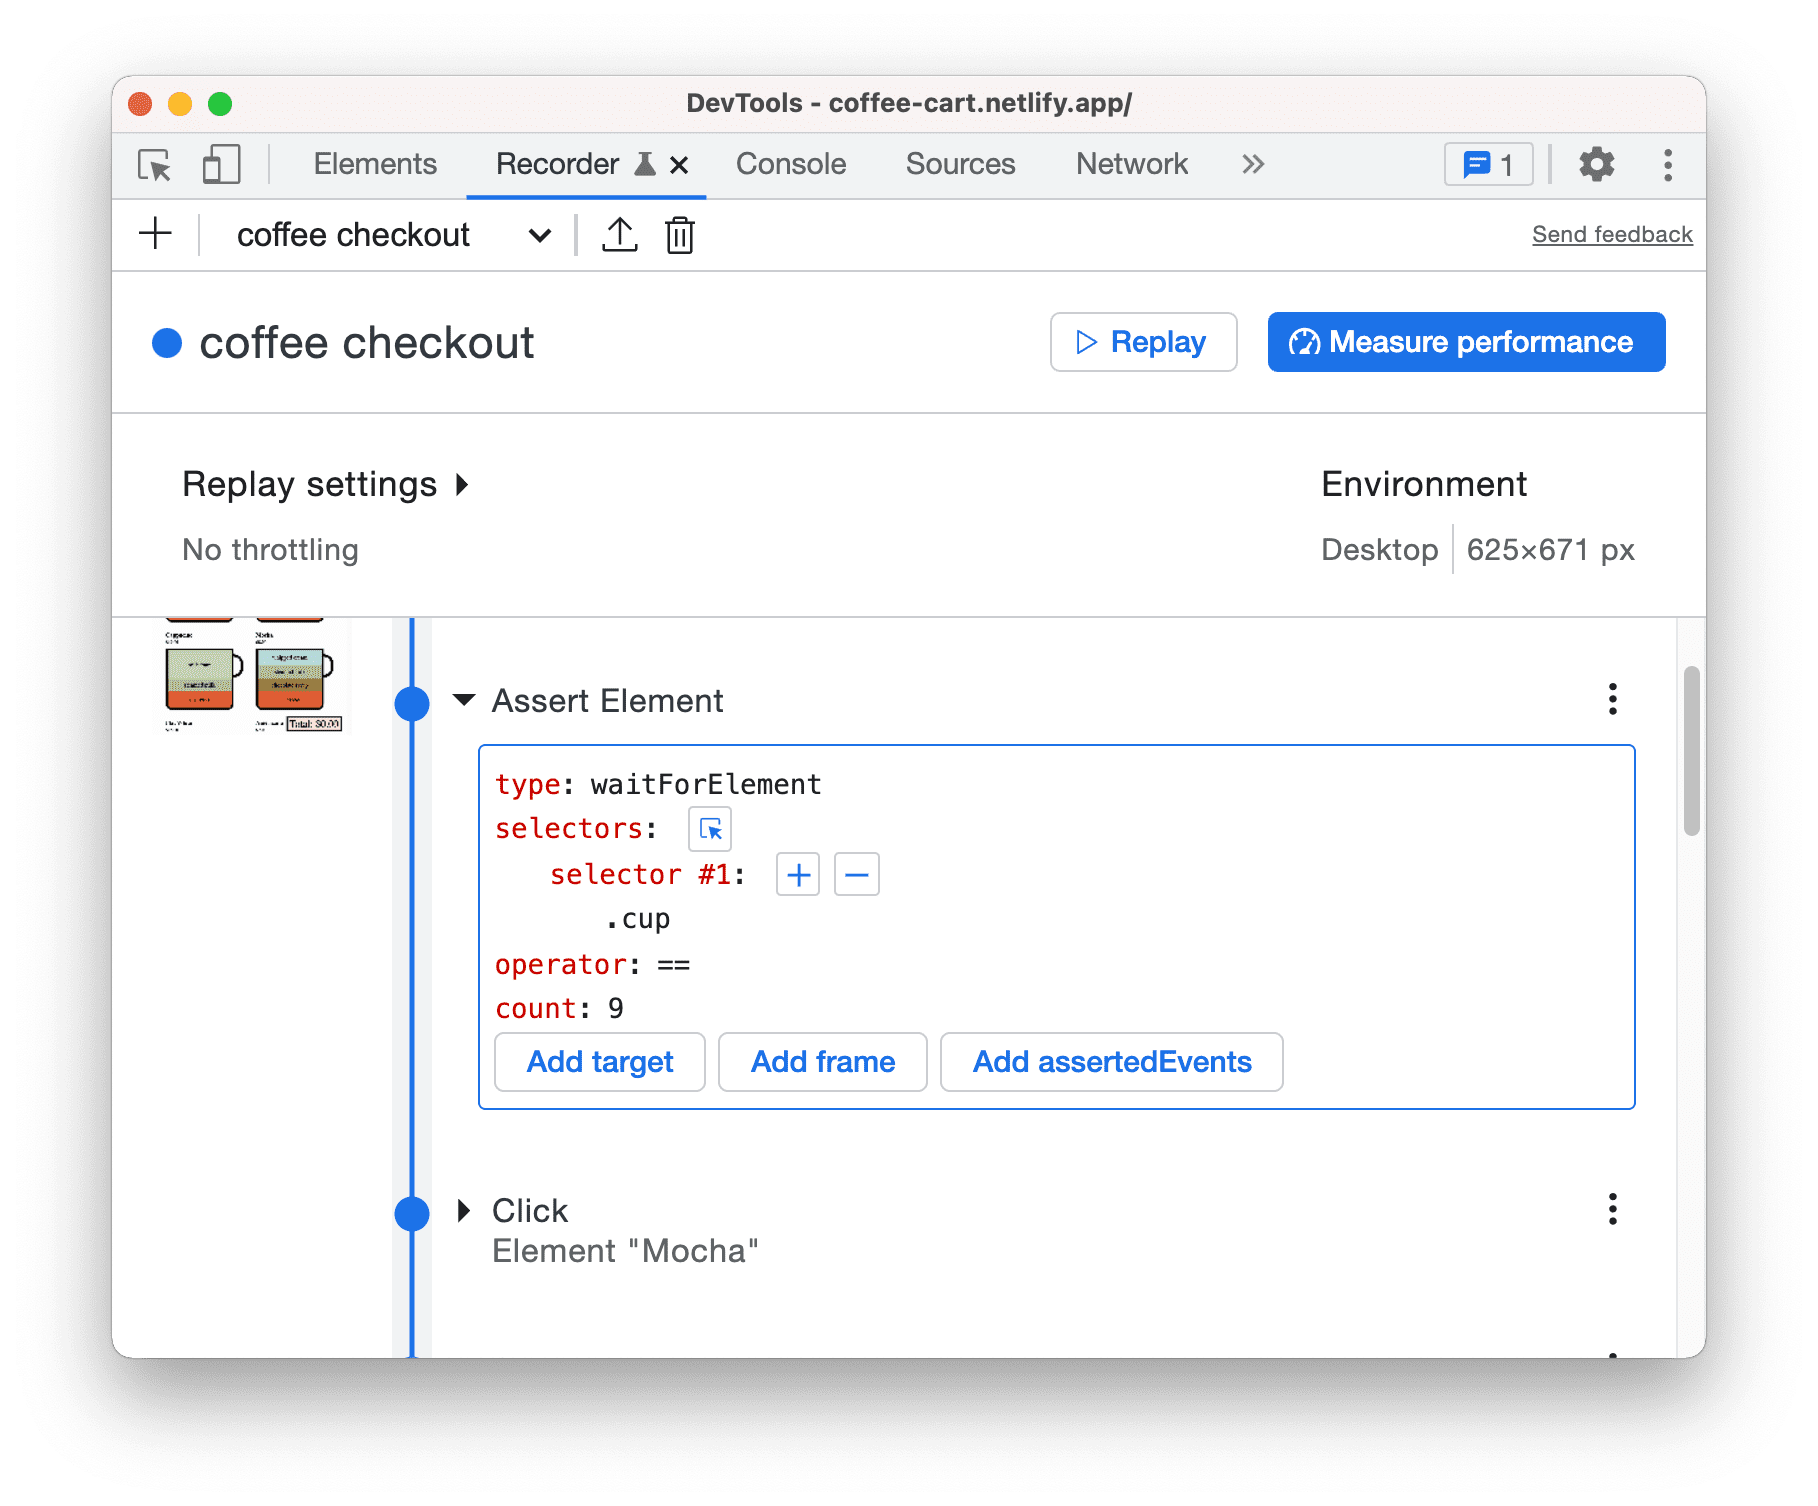 The new step for coffee checkout has been updated with the aforementioned details.